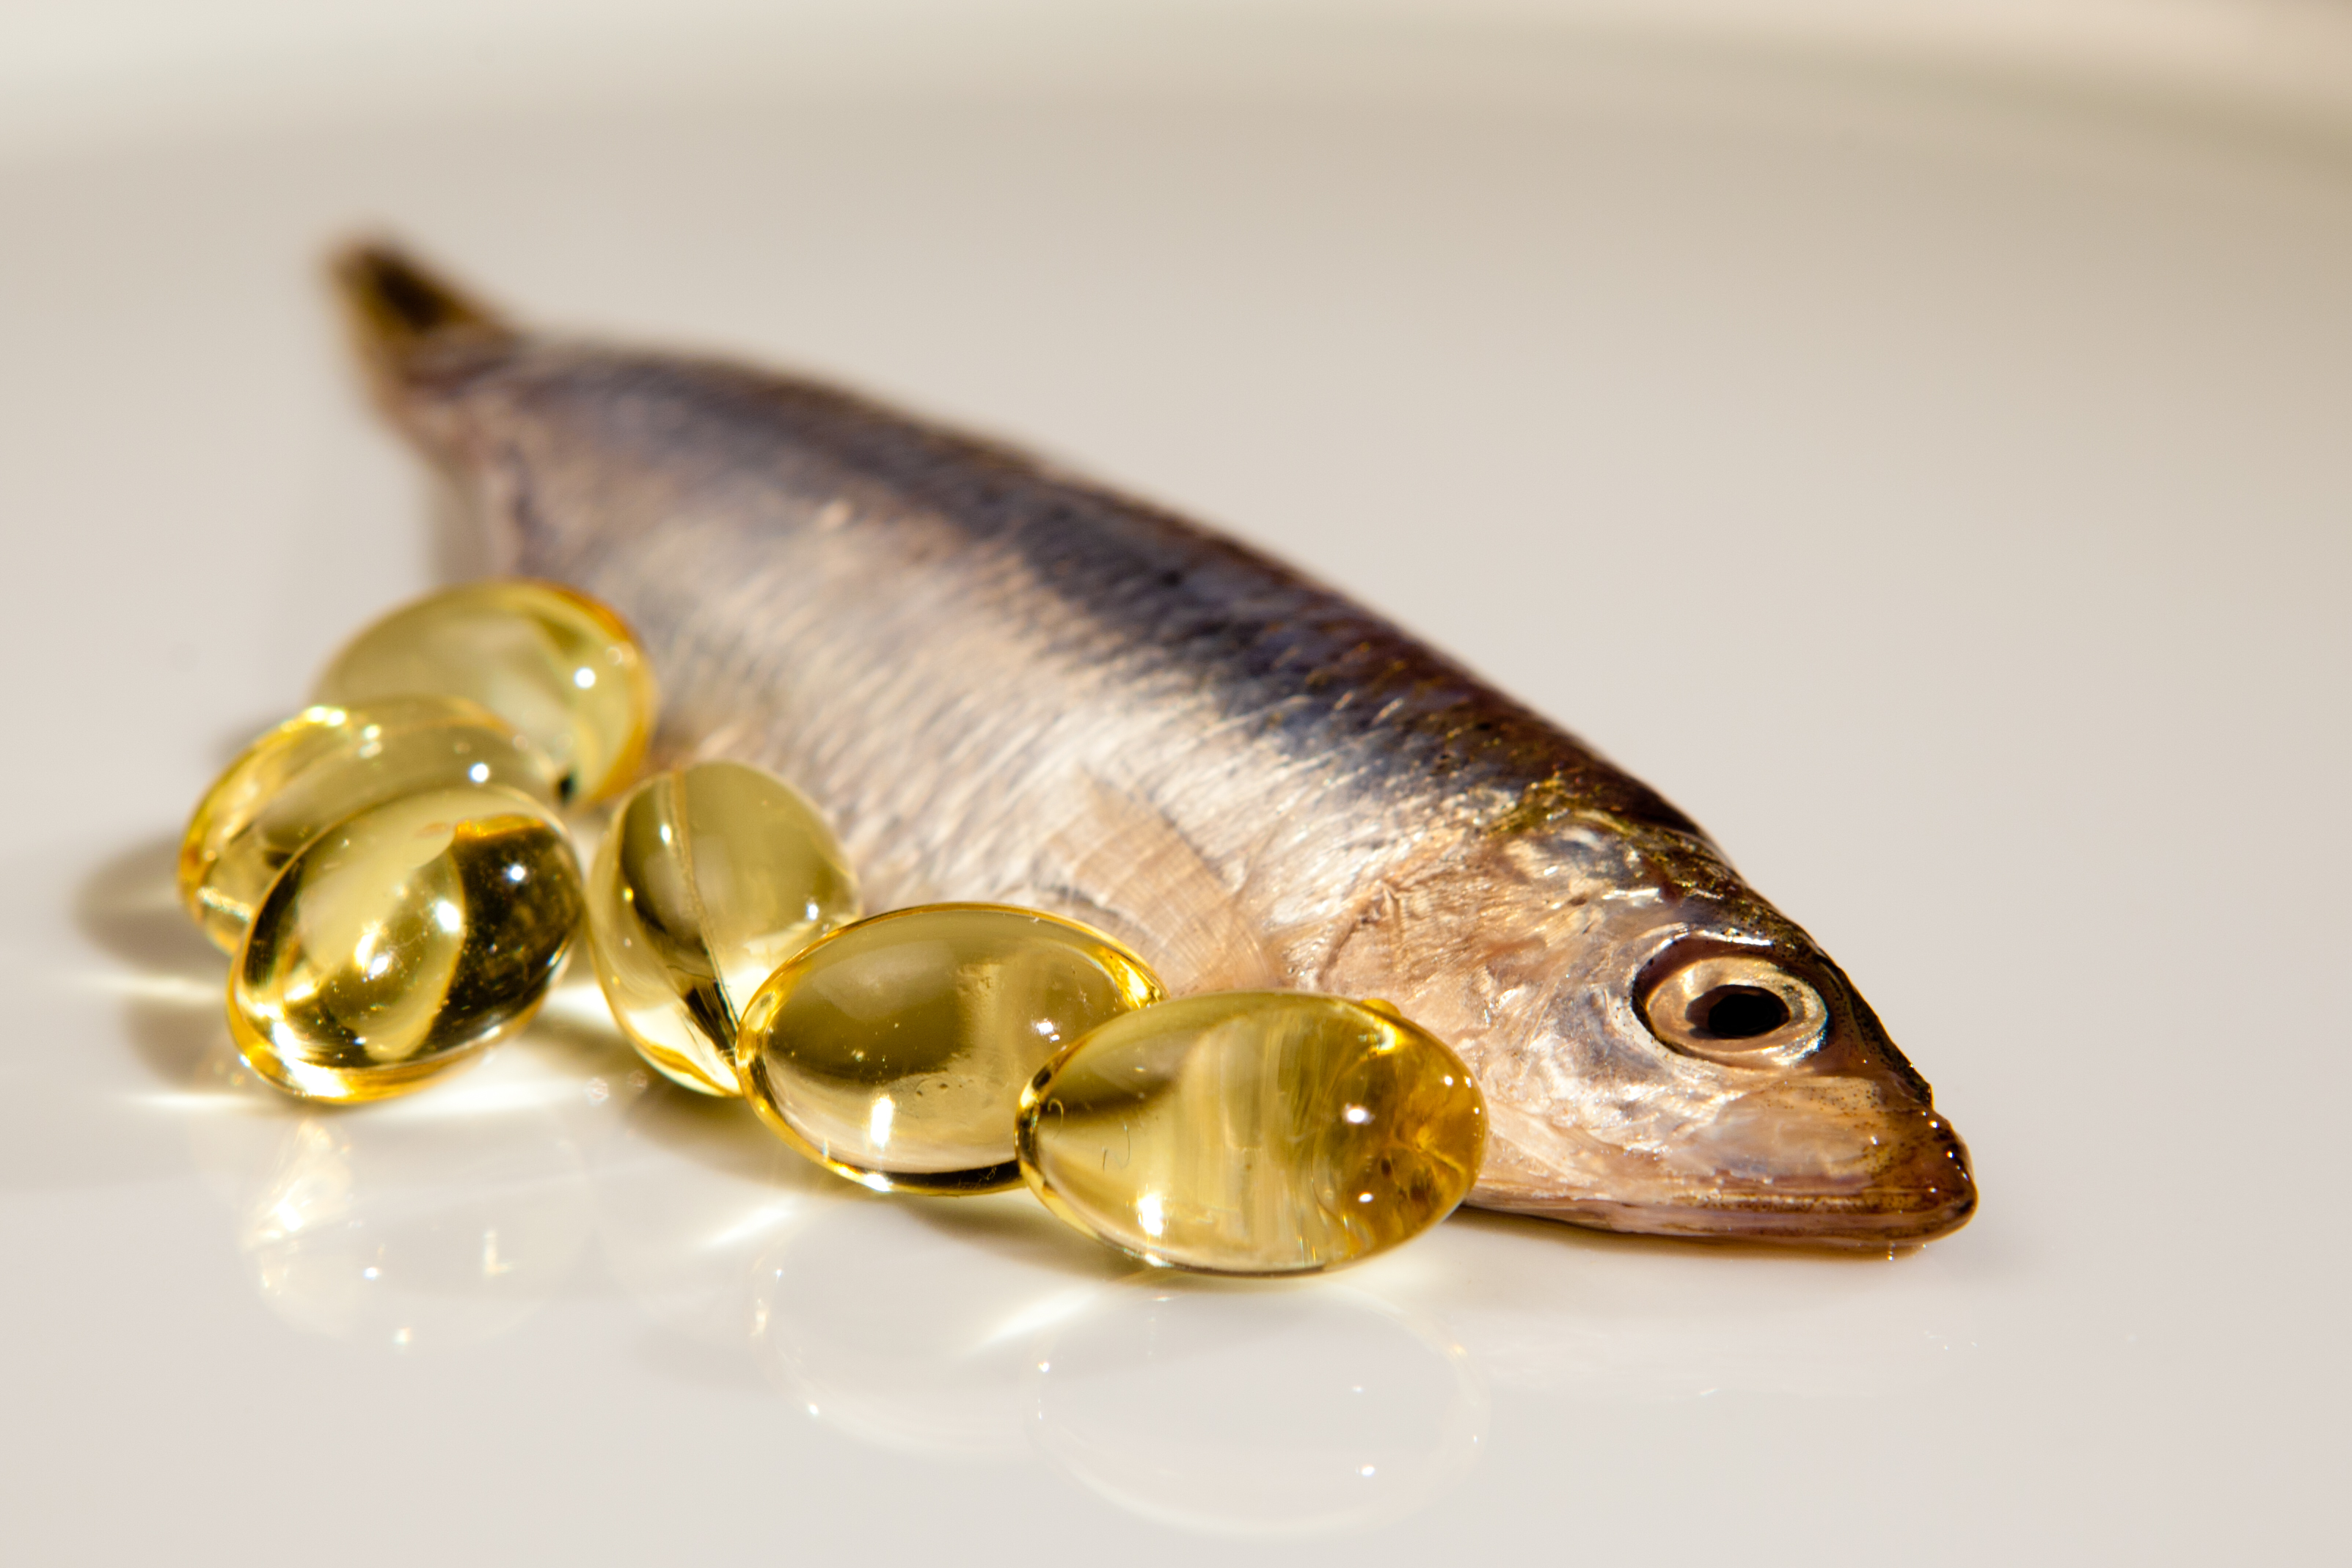 Fish oils dramatically change gut bacteria for better health